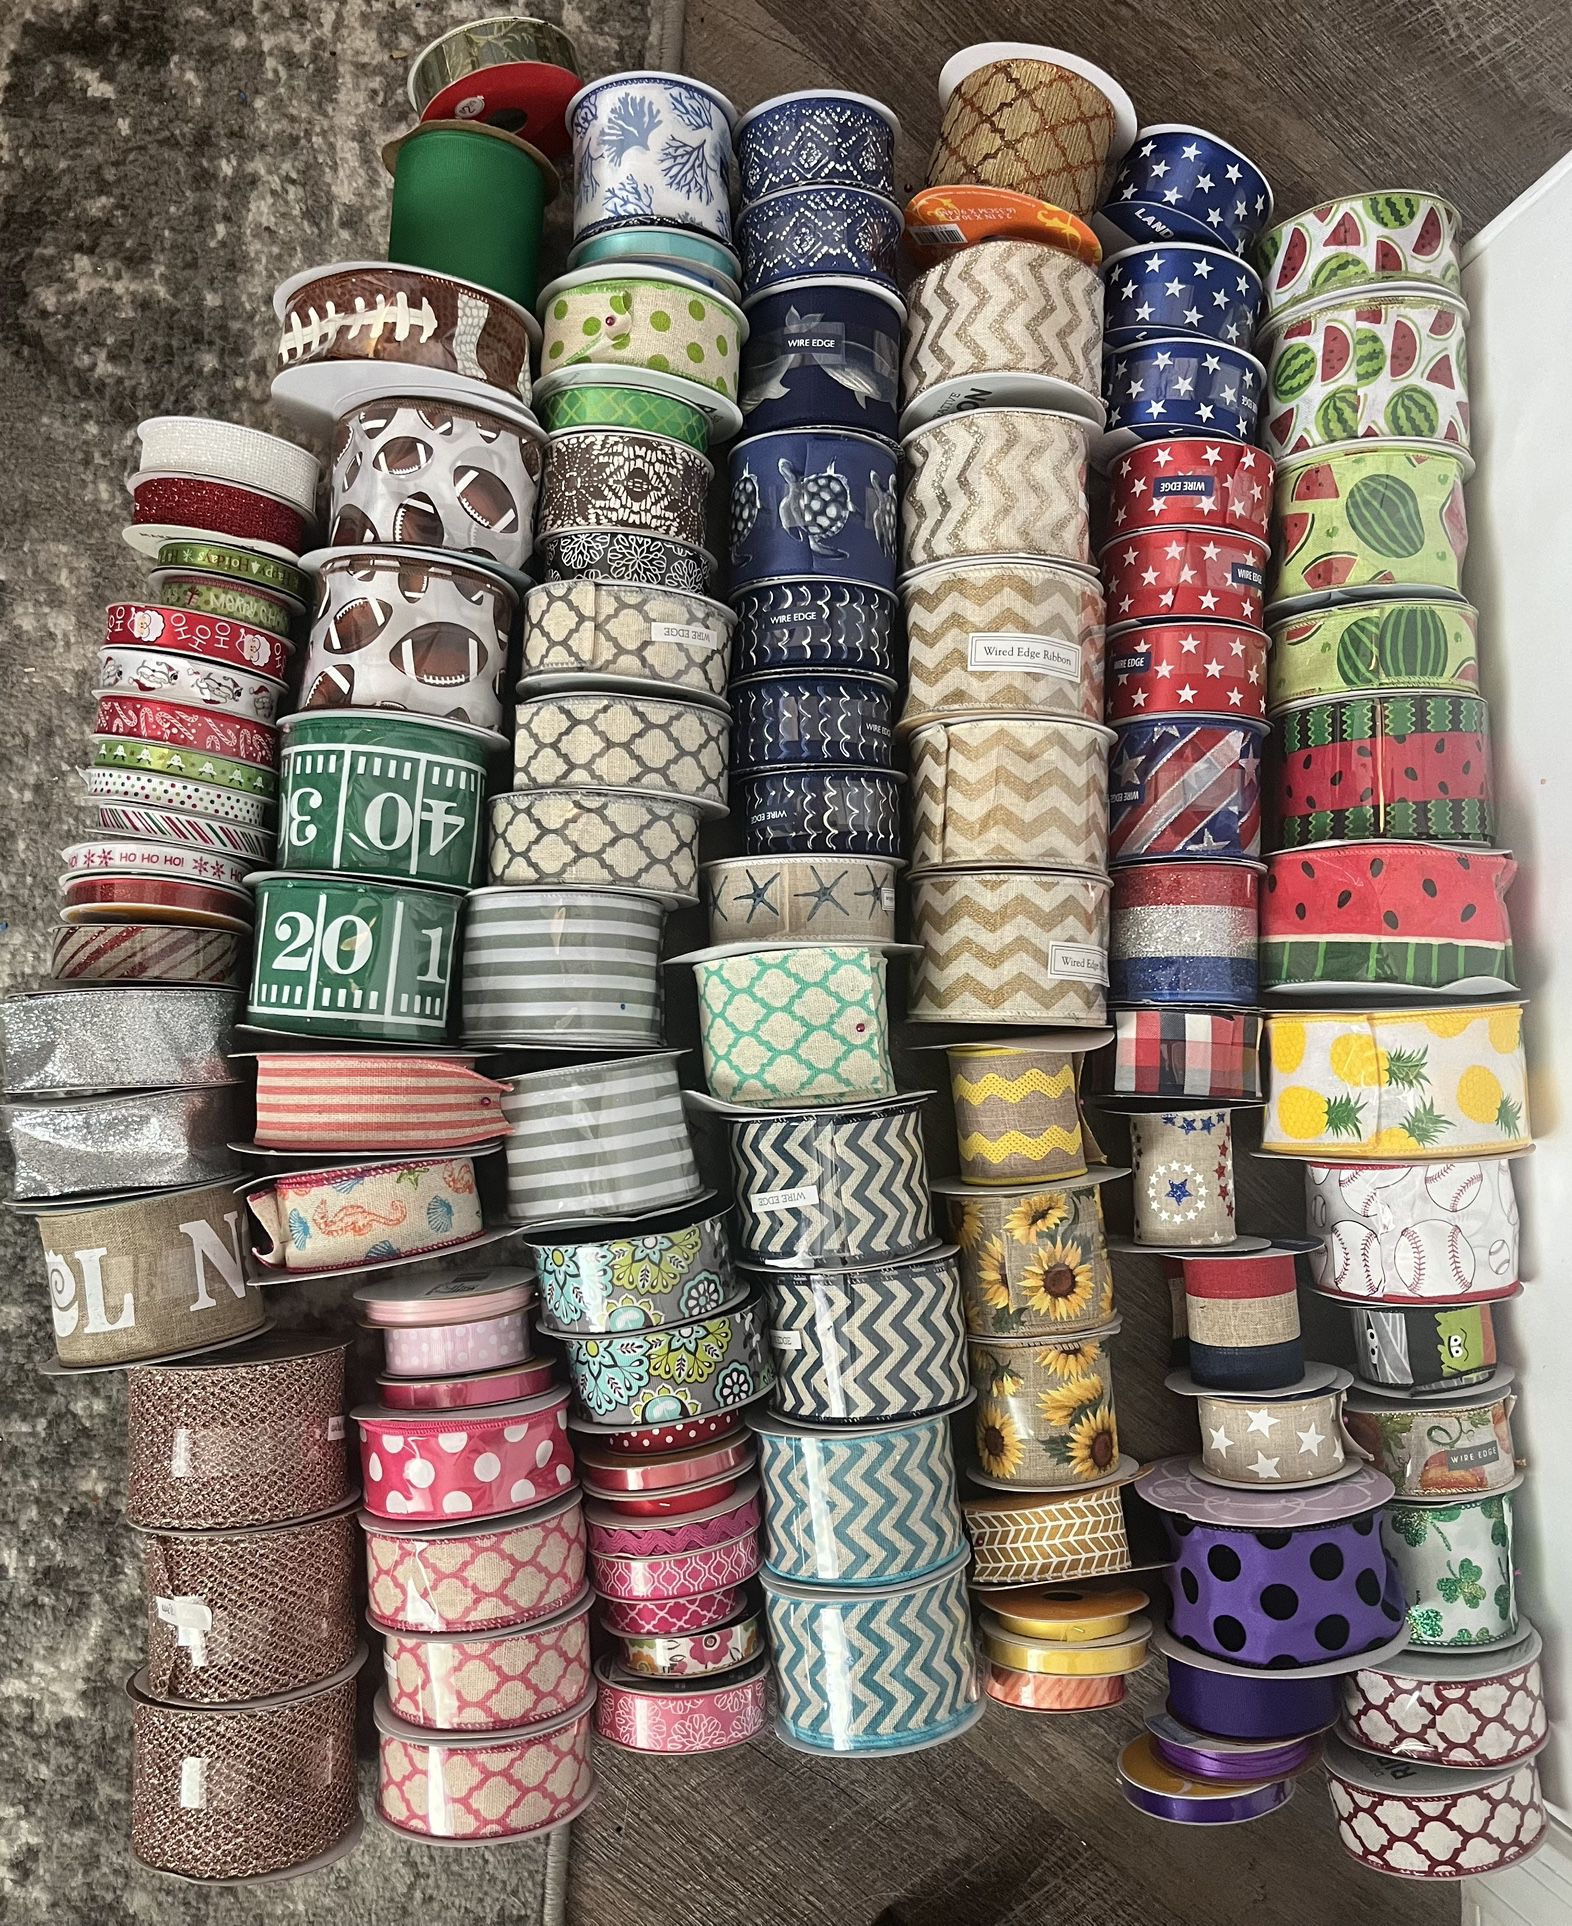 Huge Lot Of Brand New Ribbon 88% Off For Wreaths And Crafts Lot 2